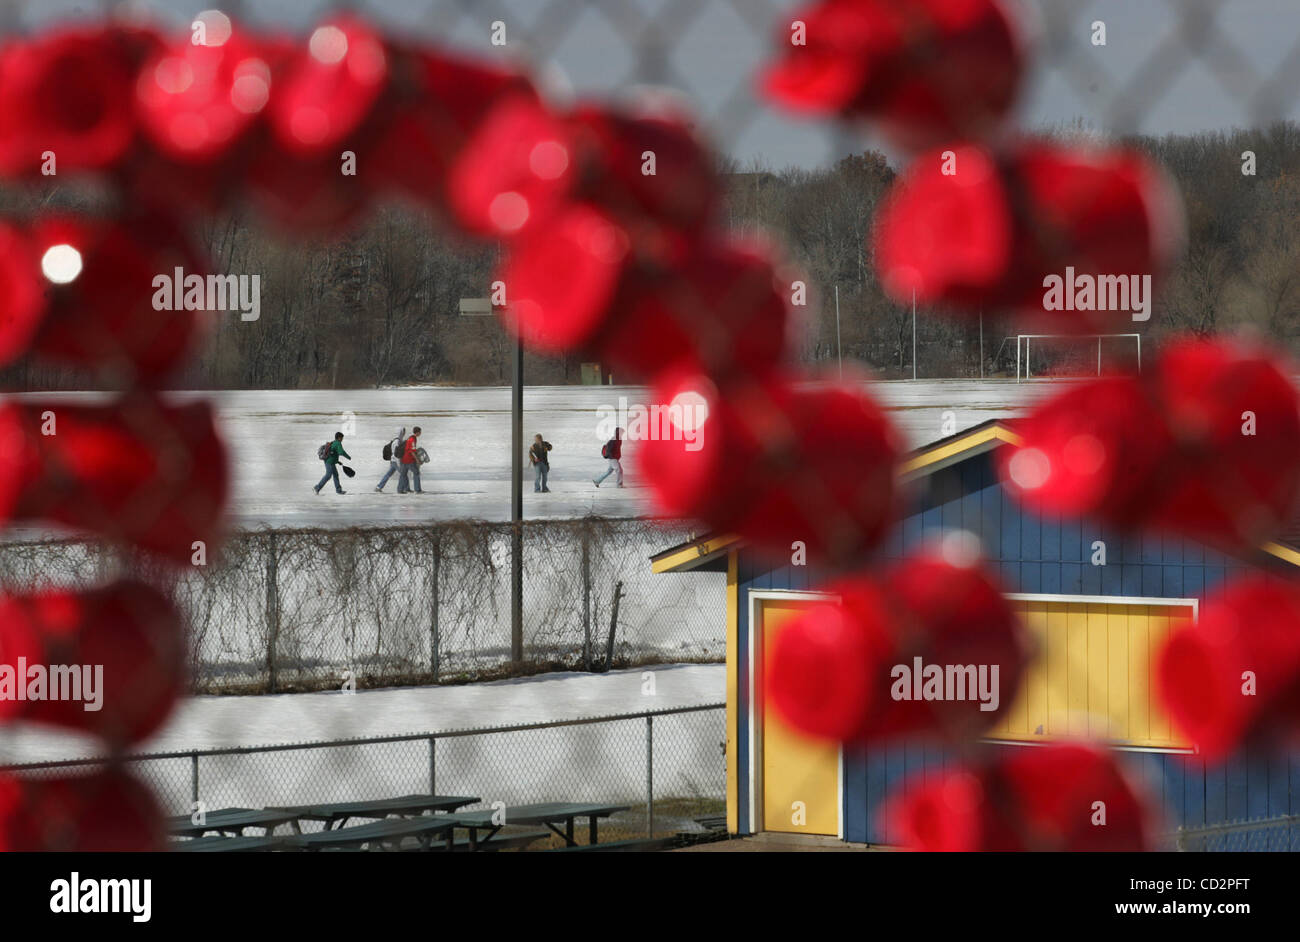 Mar 14, 2008 - Rosemount, Minnesota, USA - Rosemount High School students left school for the day on Friday. In the foreground red plastic cups were stuck into a chainlink fence to spell RIP. (Credit Image: © Jennifer Simonson/Minneapolis Star Tribune/ZUMA Press) RESTRICTIONS: * USA Tabloids Rights  Stock Photo